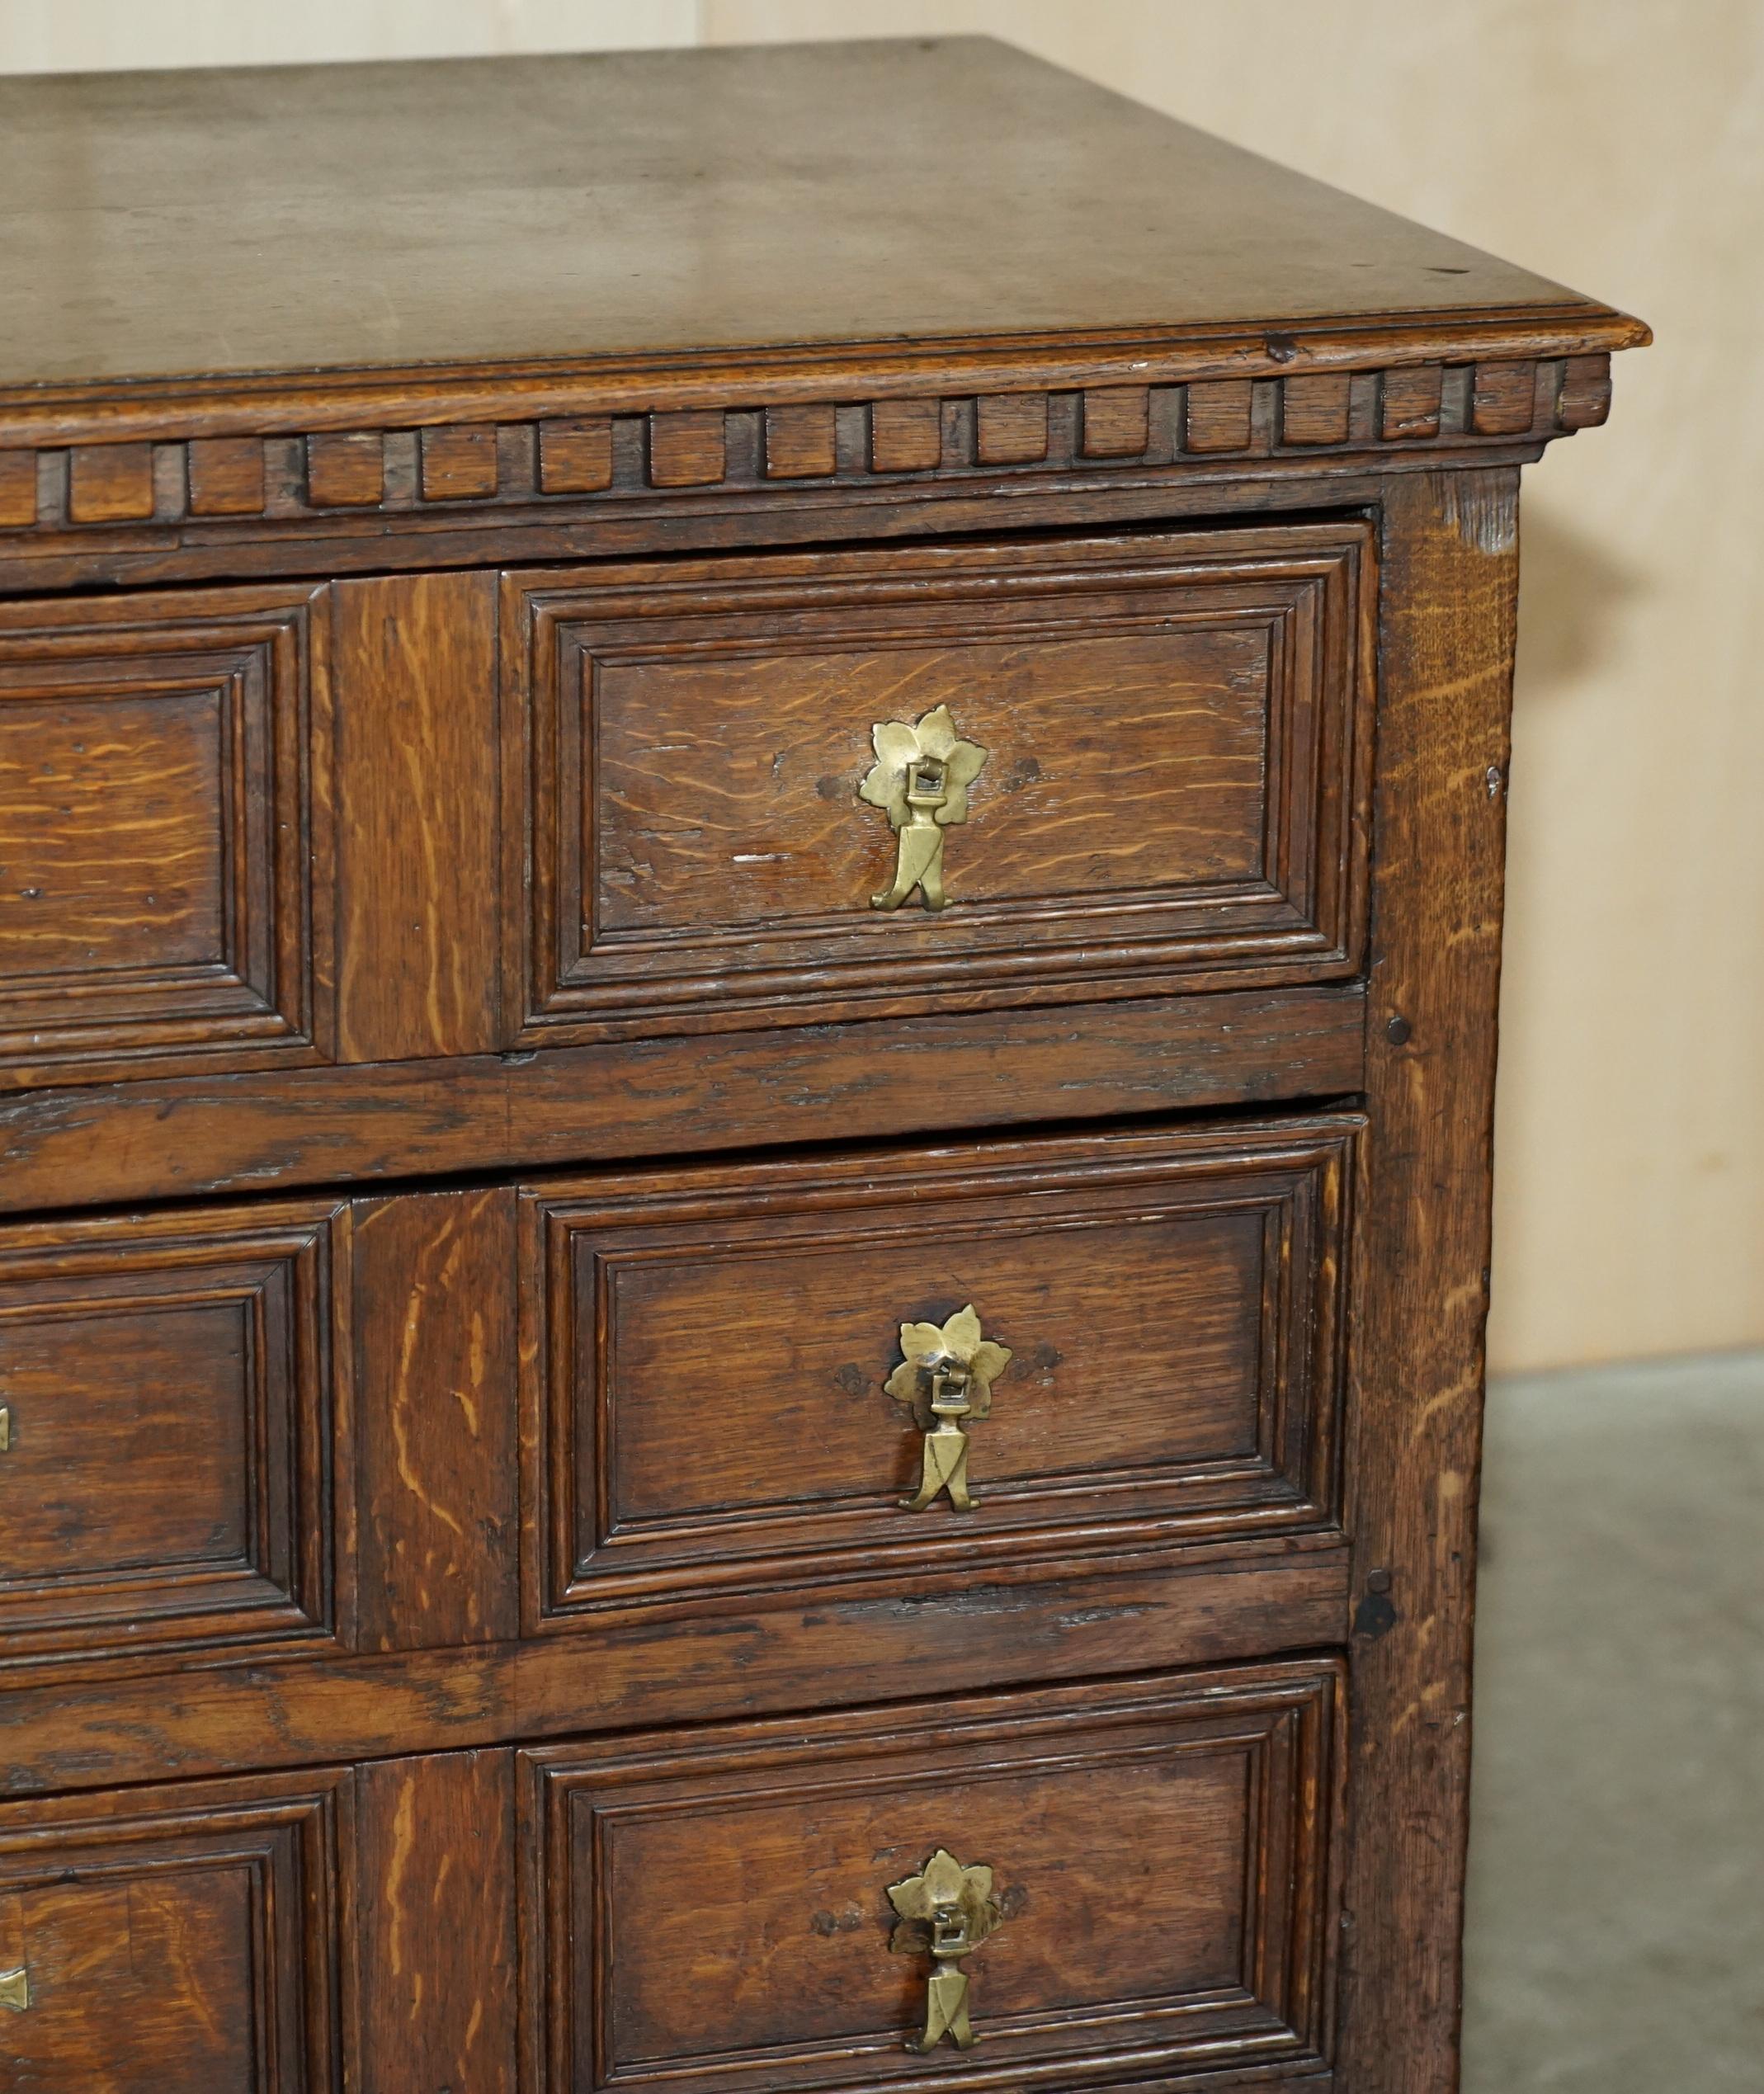 Early 18th Century circa 1720, 1740 Antque Dutch Oak Chest of Drawers Very Fine Decorative Piece For Sale